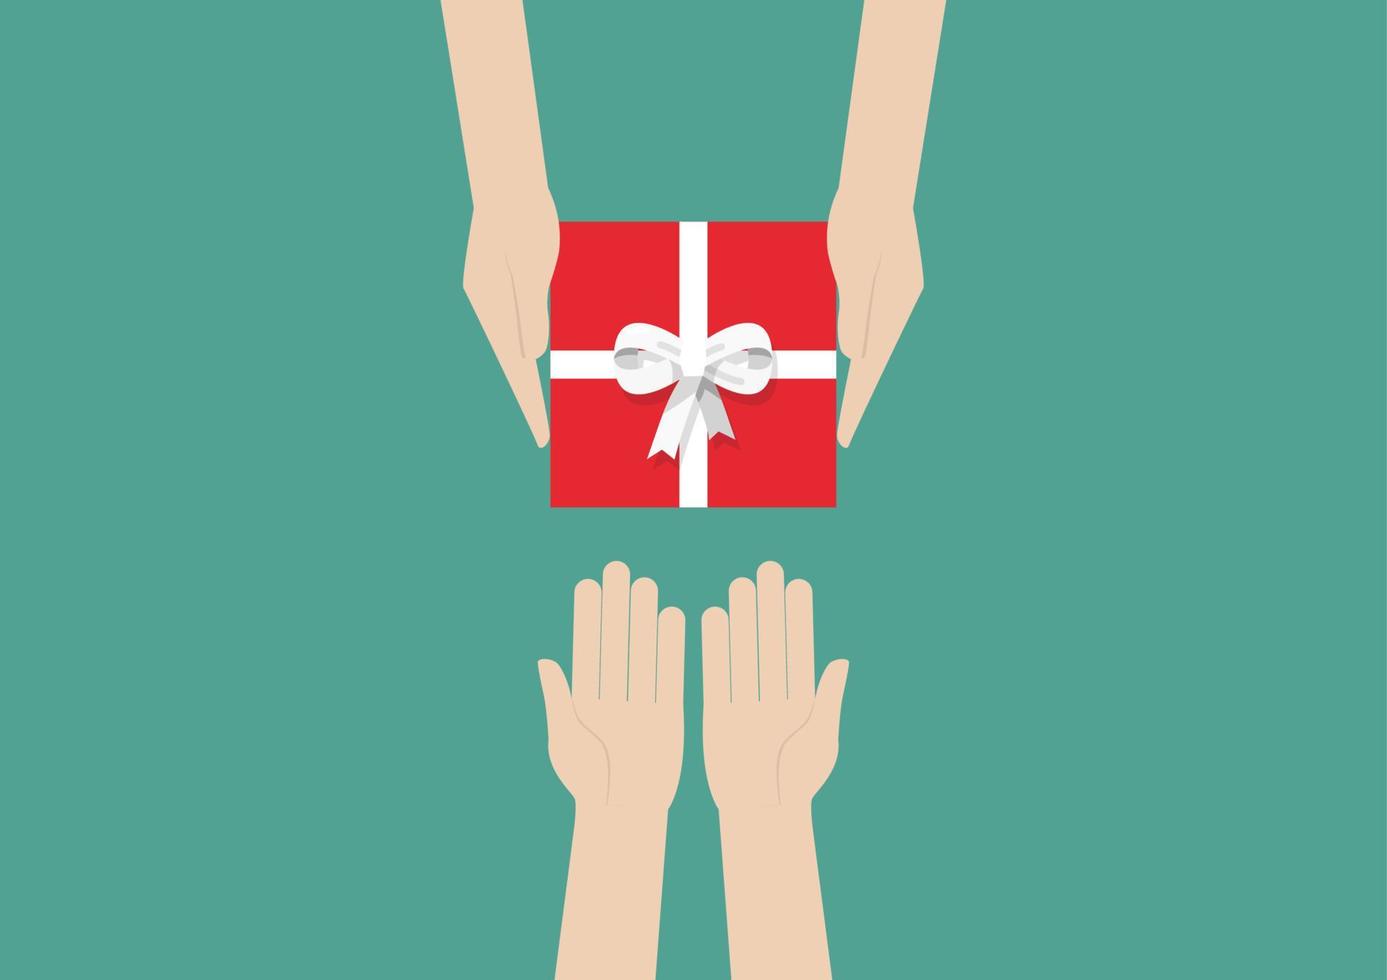 Hands holding gift or present box vector